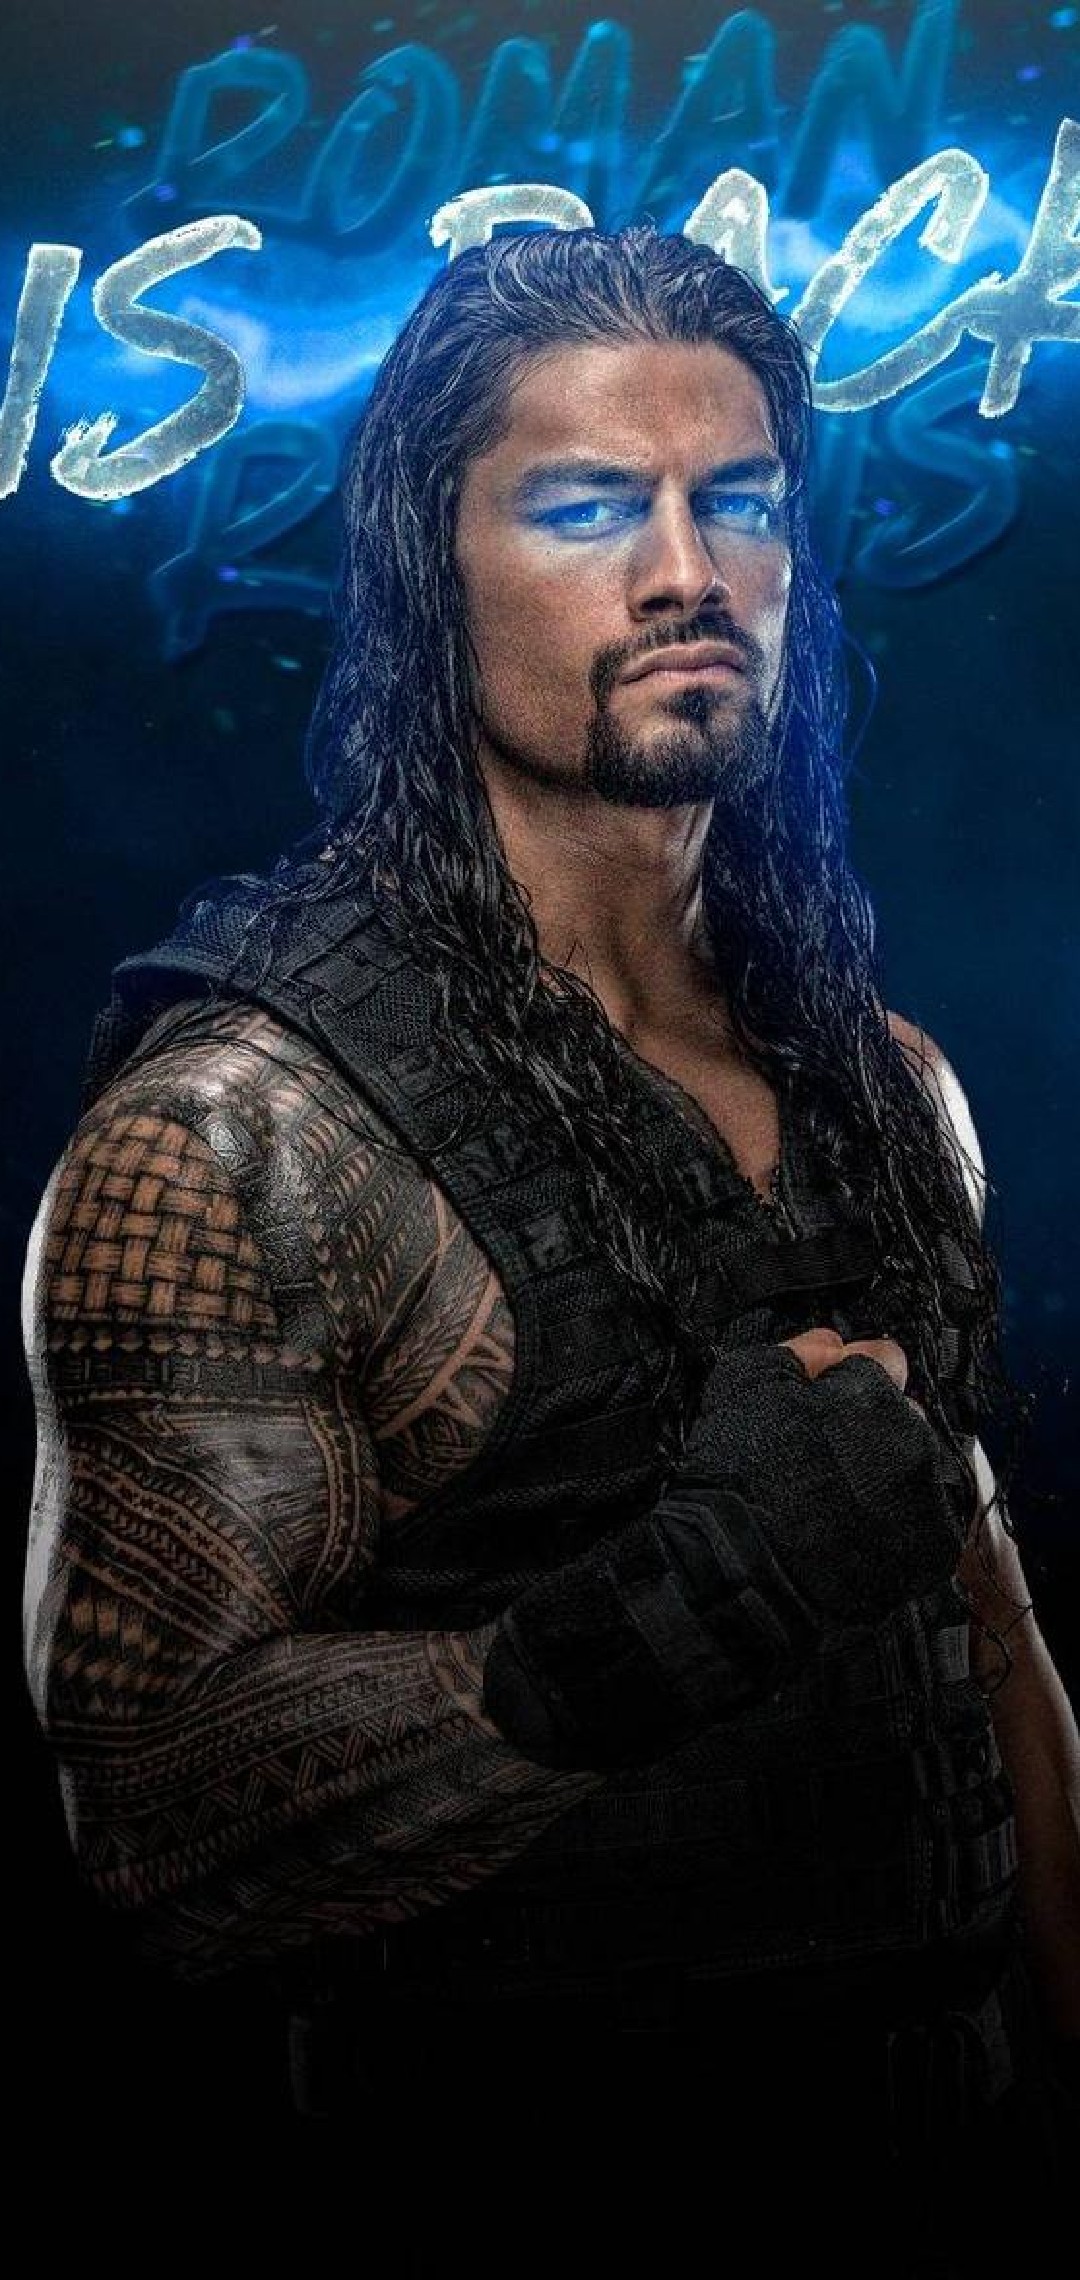 Top 75 Roman Reigns Wallpapers Download 2020 Collection